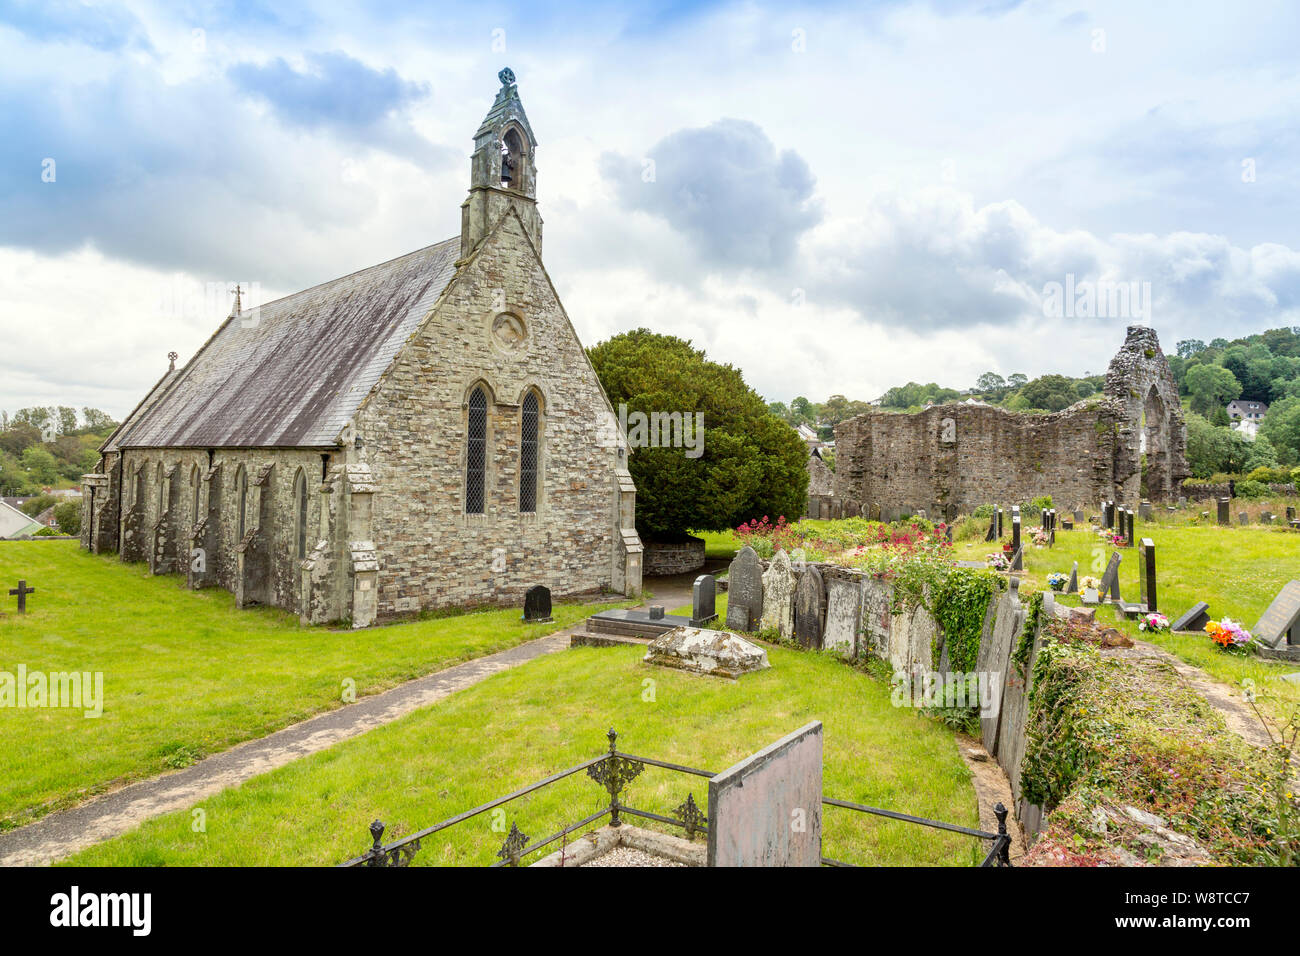 St Thomas the Apostle church is located amongst the ruins of the 12th century St Dogmaels Abbey, near Cardigan, Pembrokeshire, Wales, UK Stock Photo